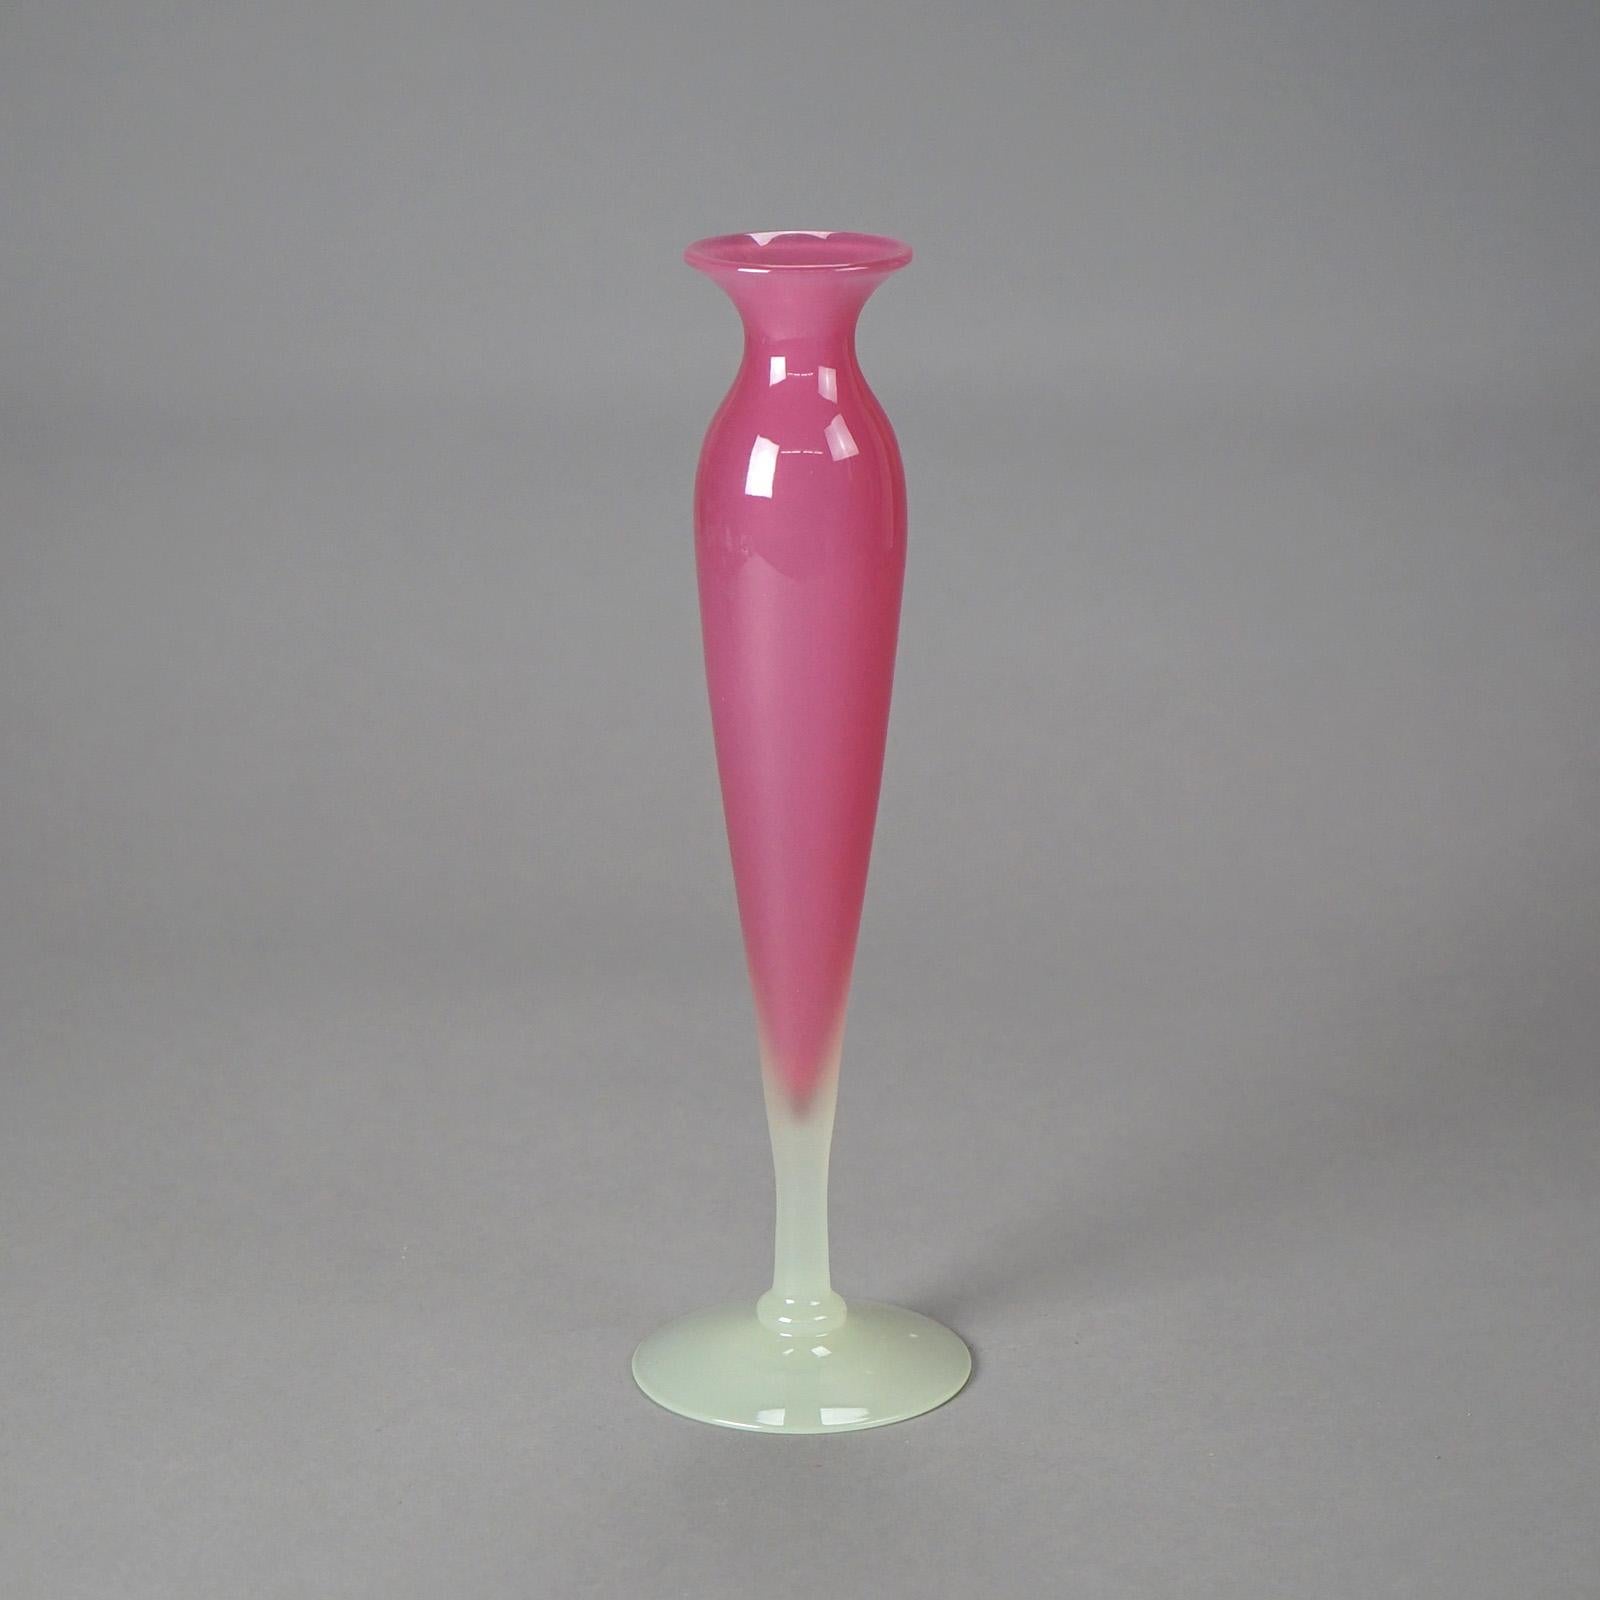 An antique Steuben footed bud vase offers Rosaline Pink and Alabaster art glass construction, c1920

Measures - 12.25